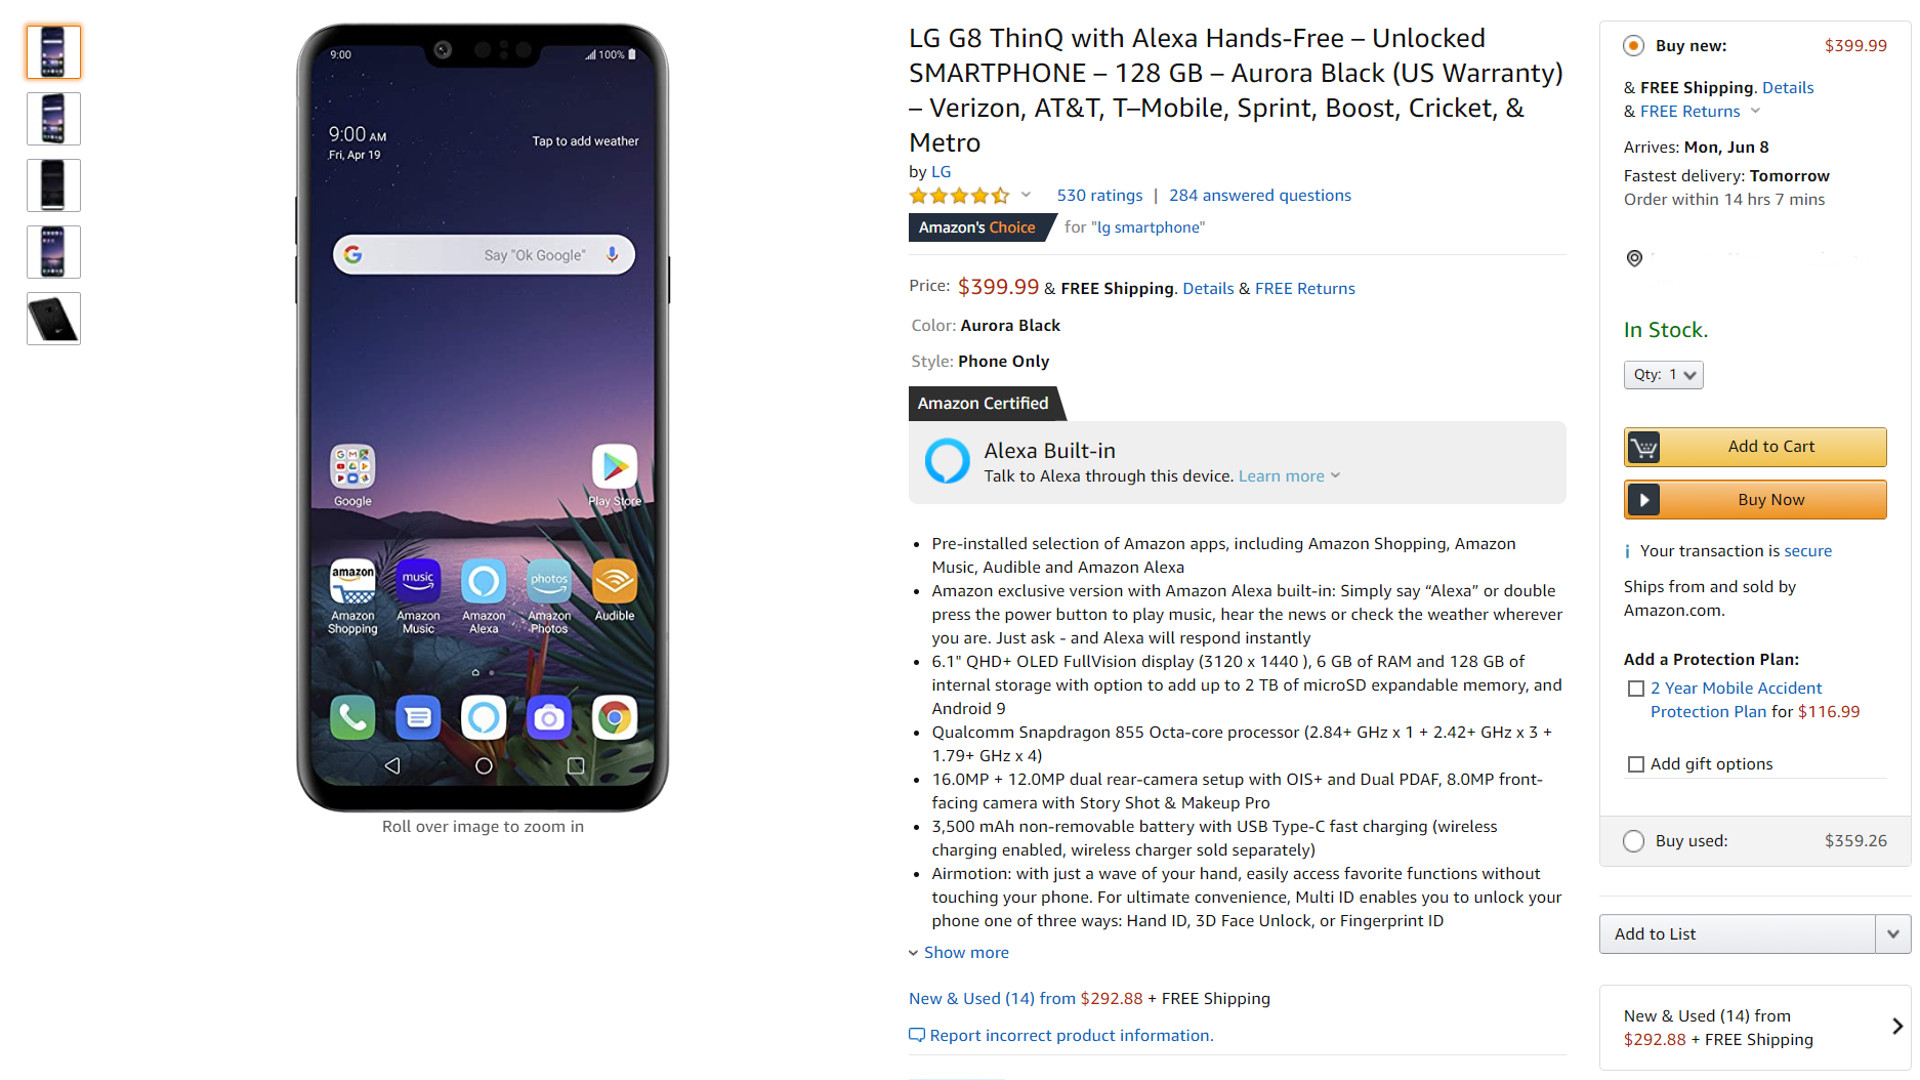 This LG G8 deal is one of the best we've come across yet.